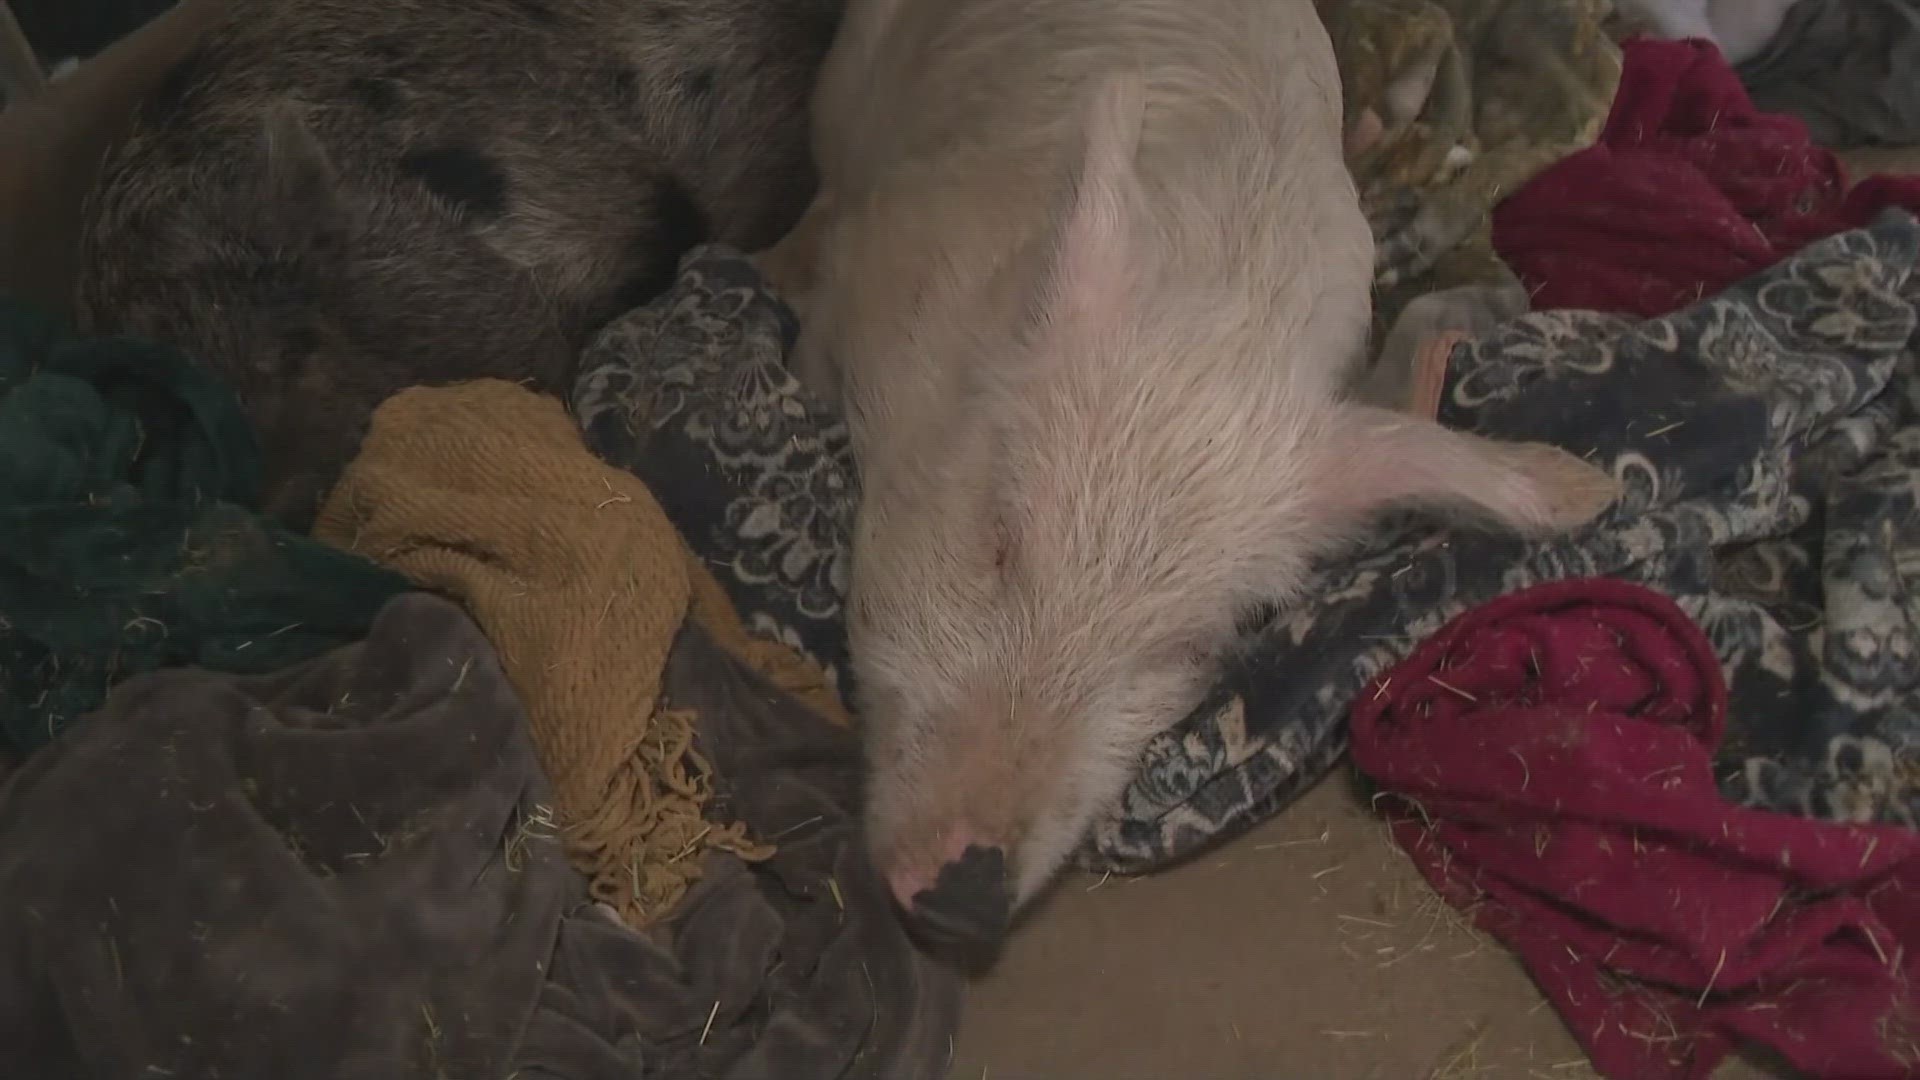 The rescue's mission is to rescue educated, rehabilitate and adopt potbelly pigs across the state.